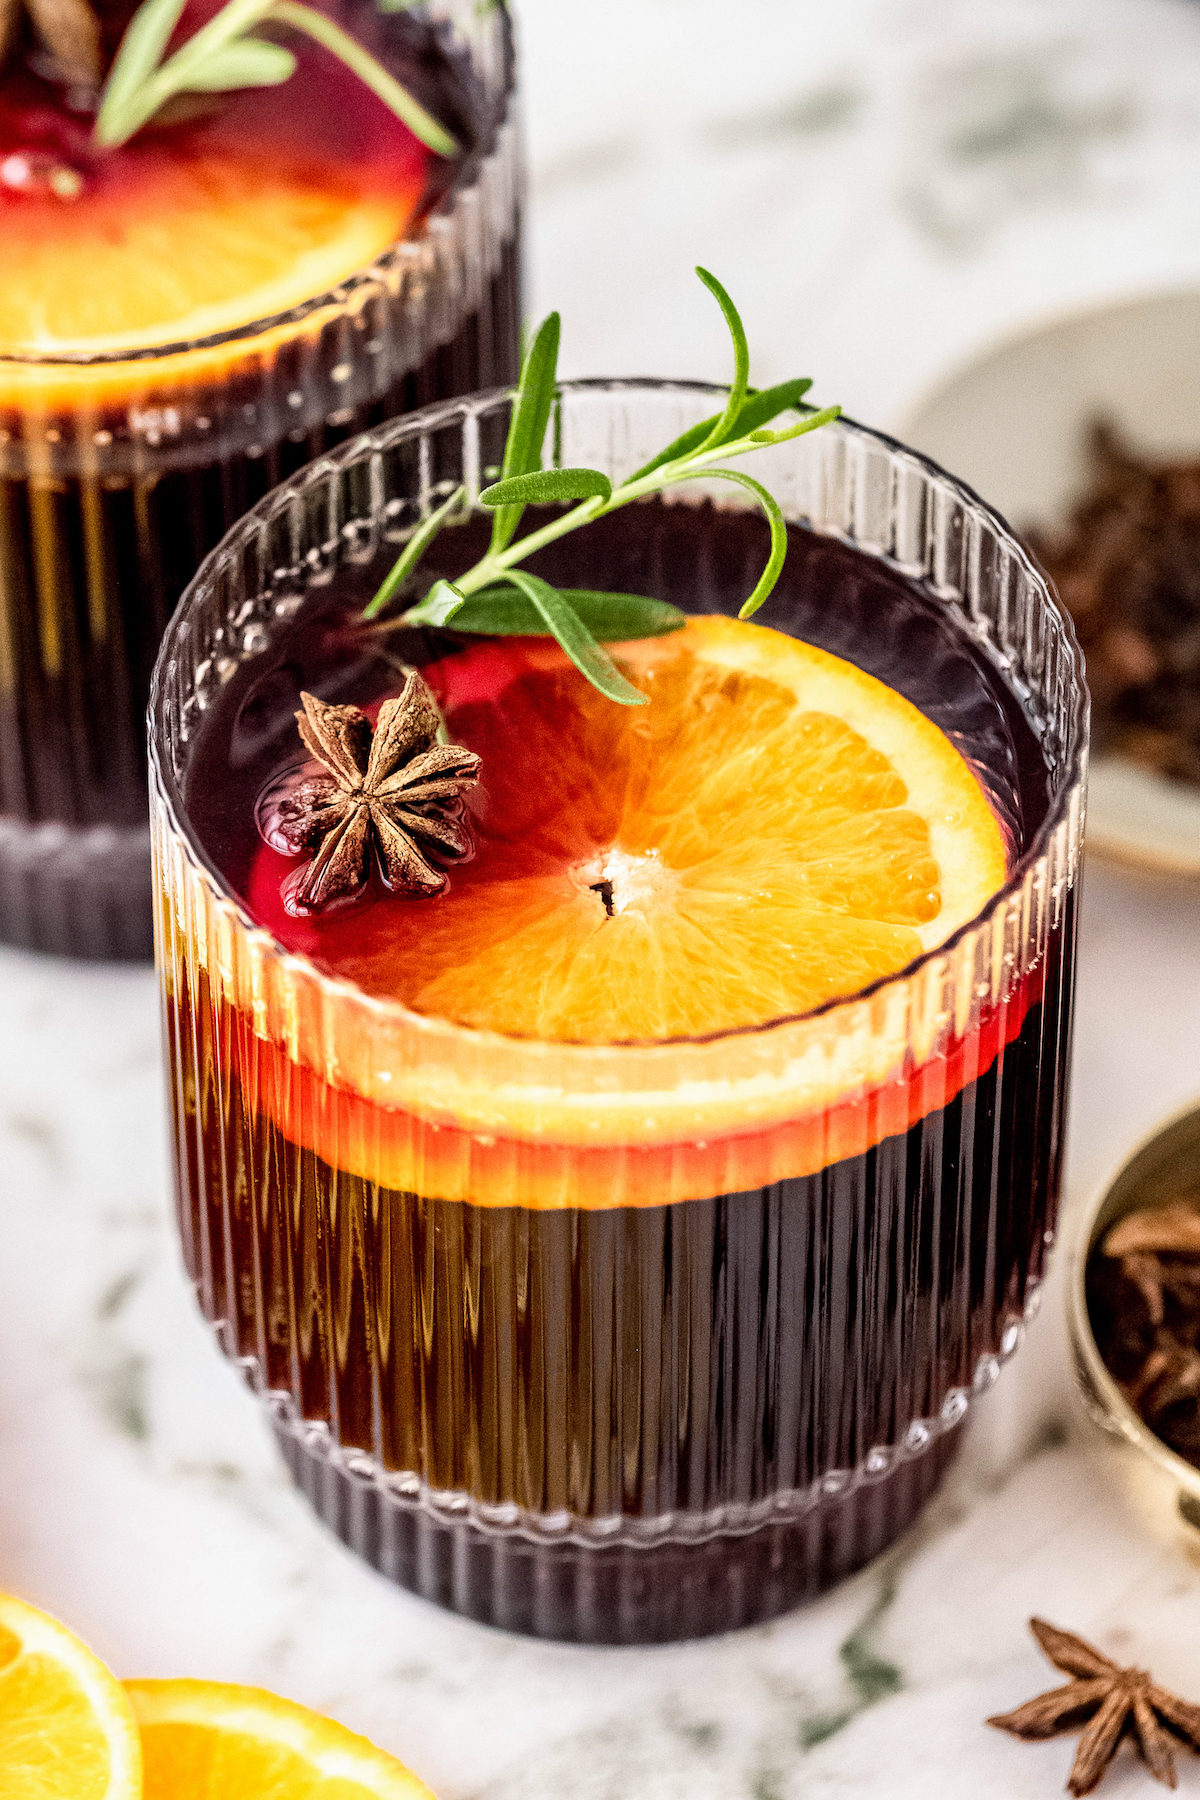 Mulled wine garnished with an orange slice, star anise, and rosemary.